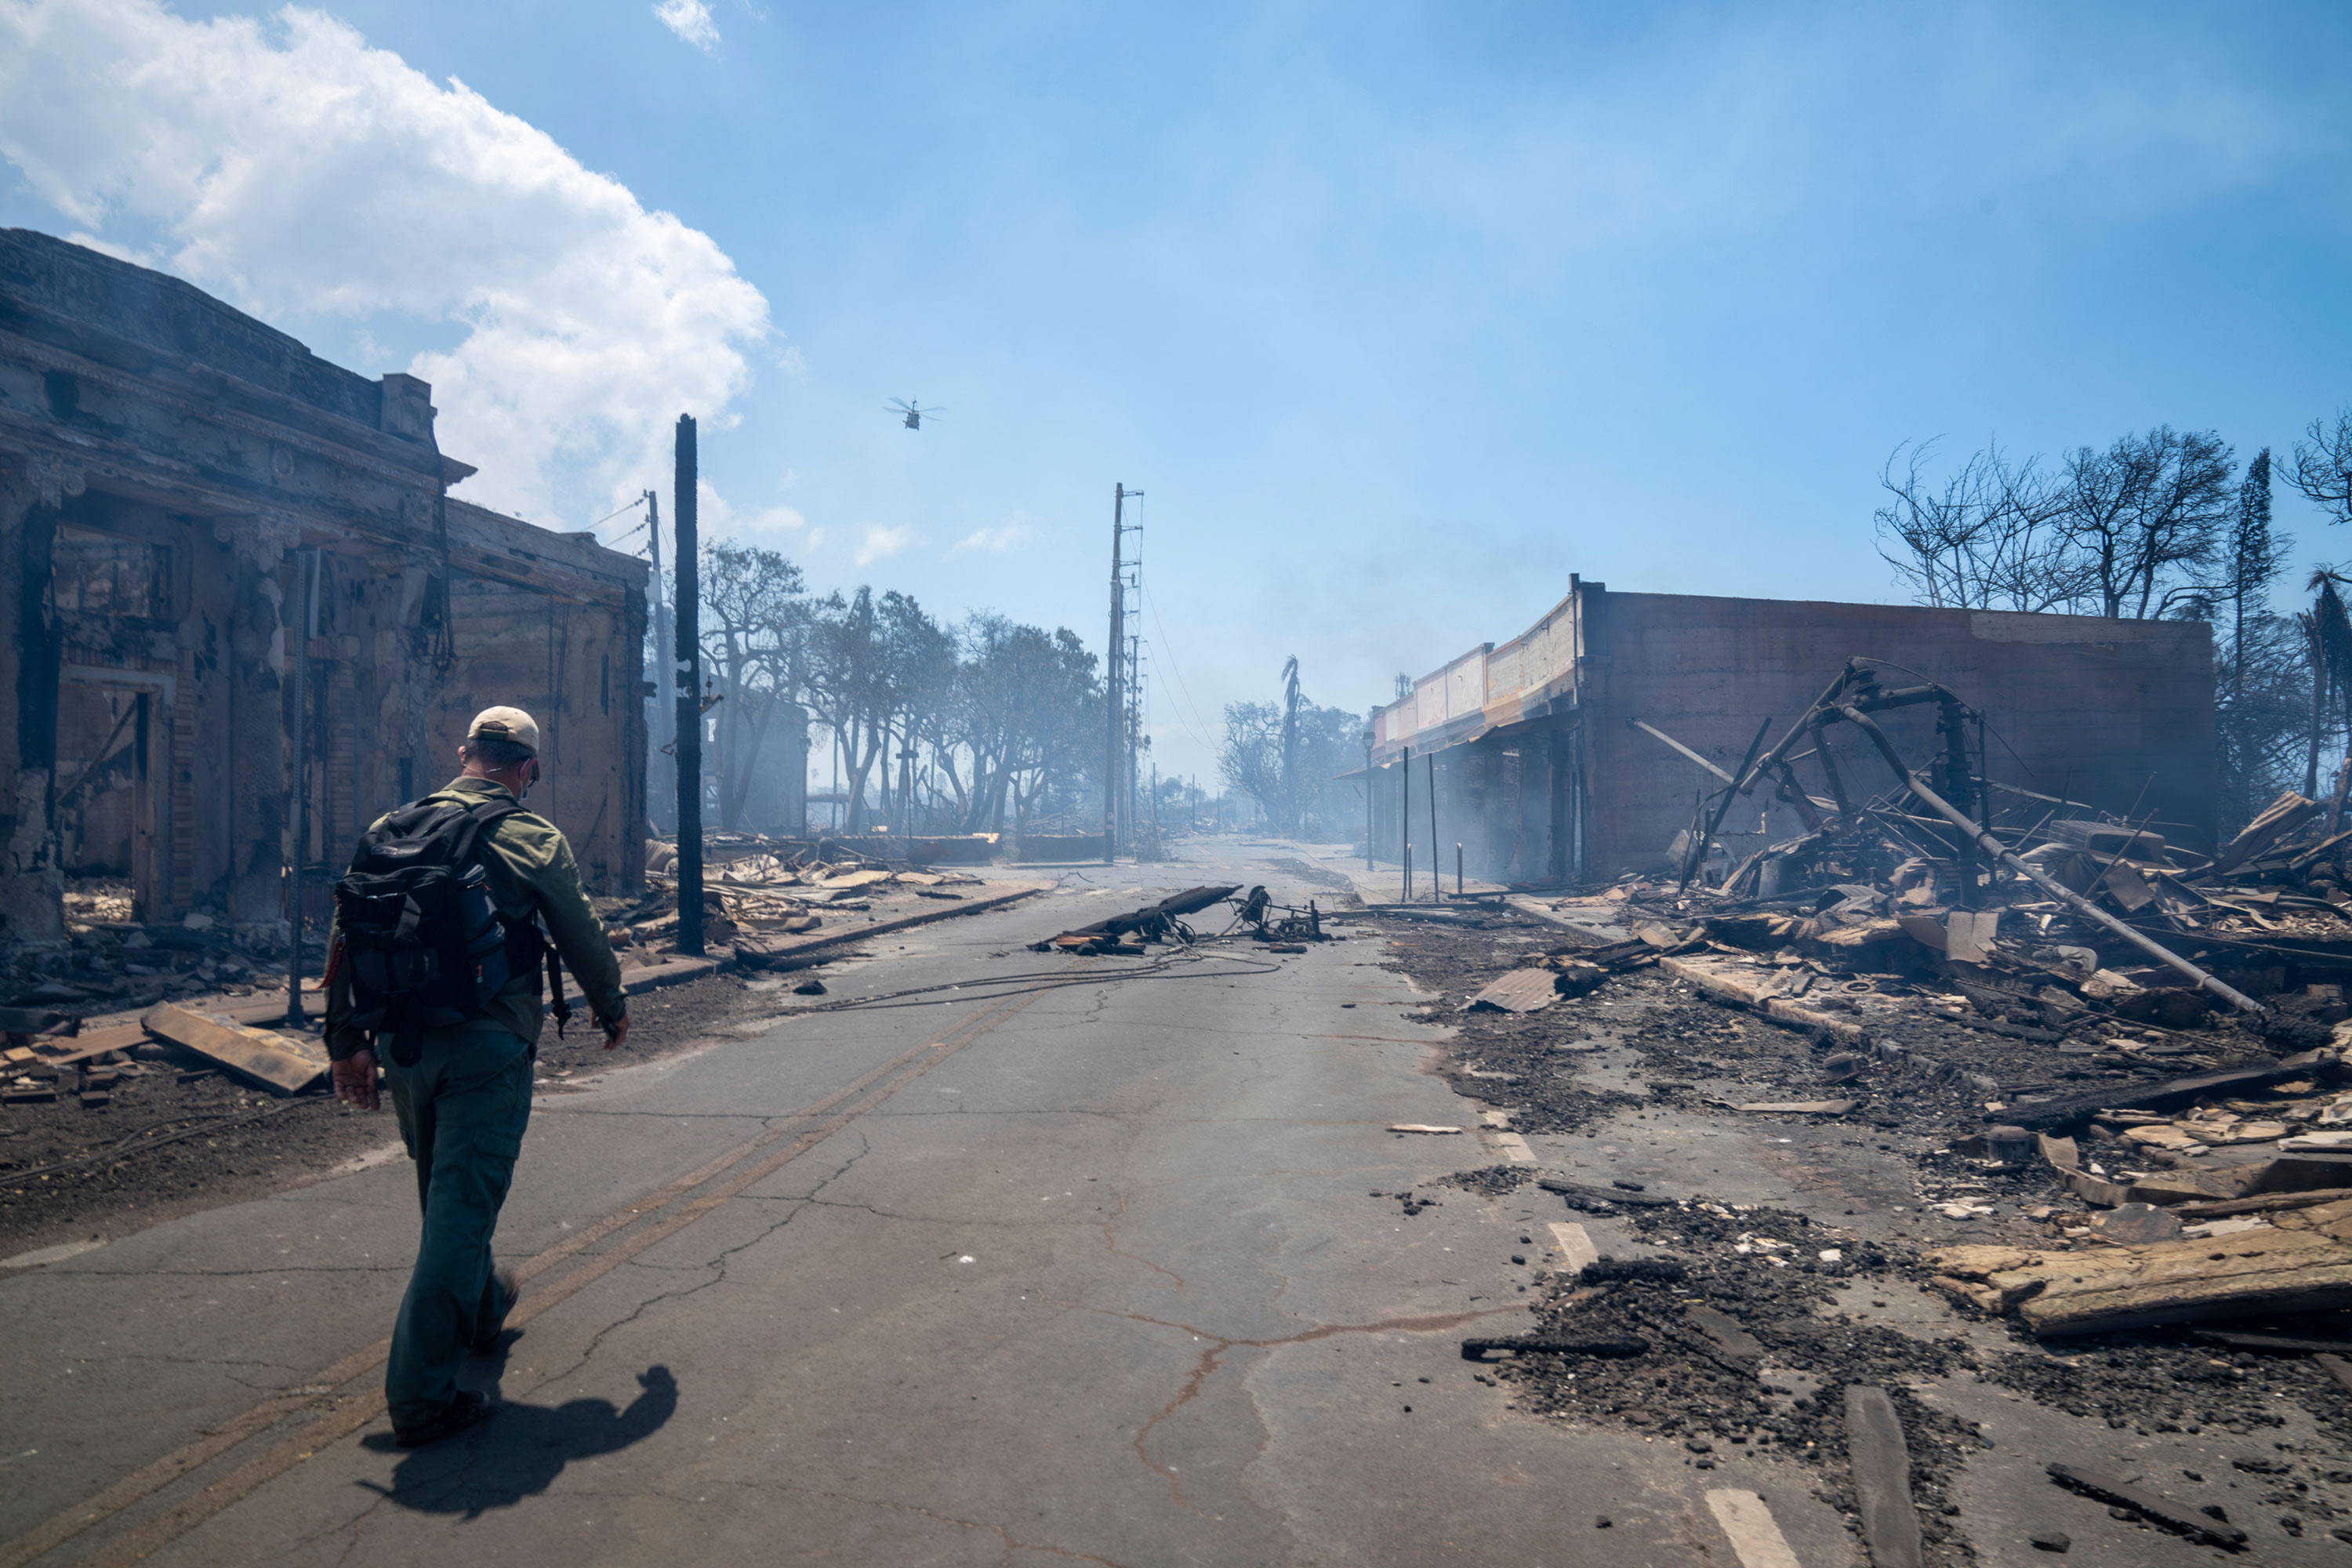 A man walks past wildfire damage in Lahaina, Hawaii, on Wednesday.